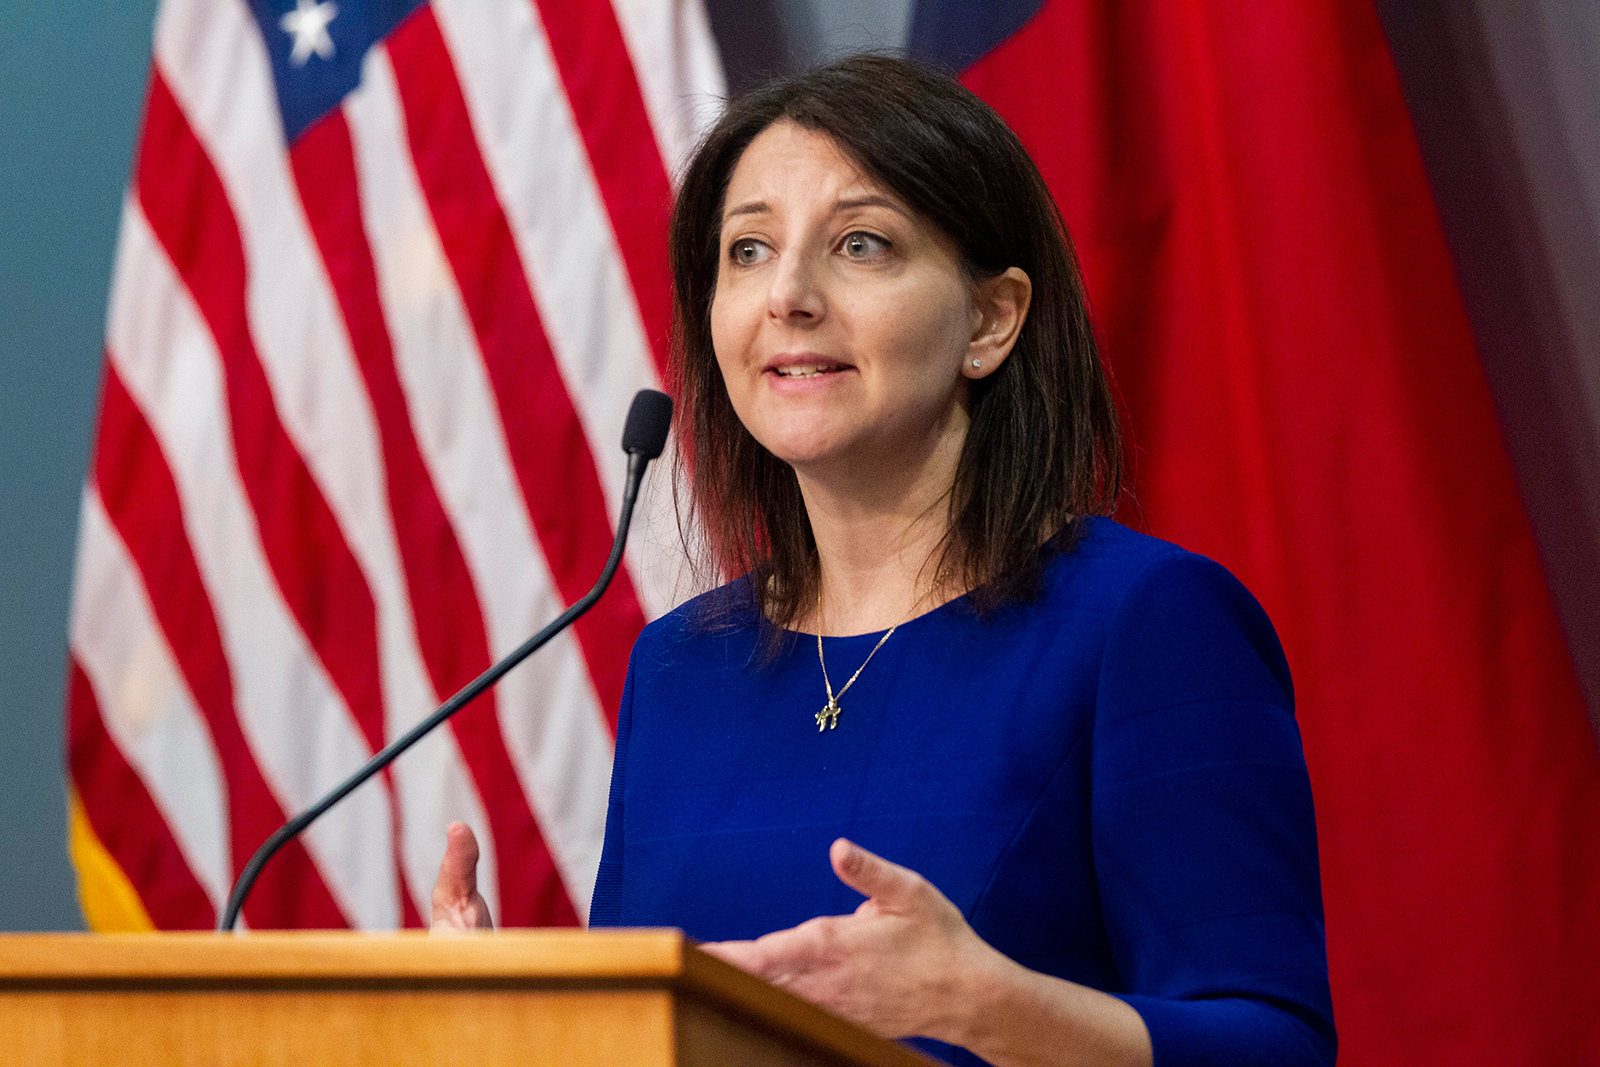 Secretary of the North Carolina Department Health and Human Services Dr. Mandy Cohen speaks during a briefing on the states coronavirus pandemic response at the NC Emergency Operations Center, on April 17, in Raleigh, North Carolina.